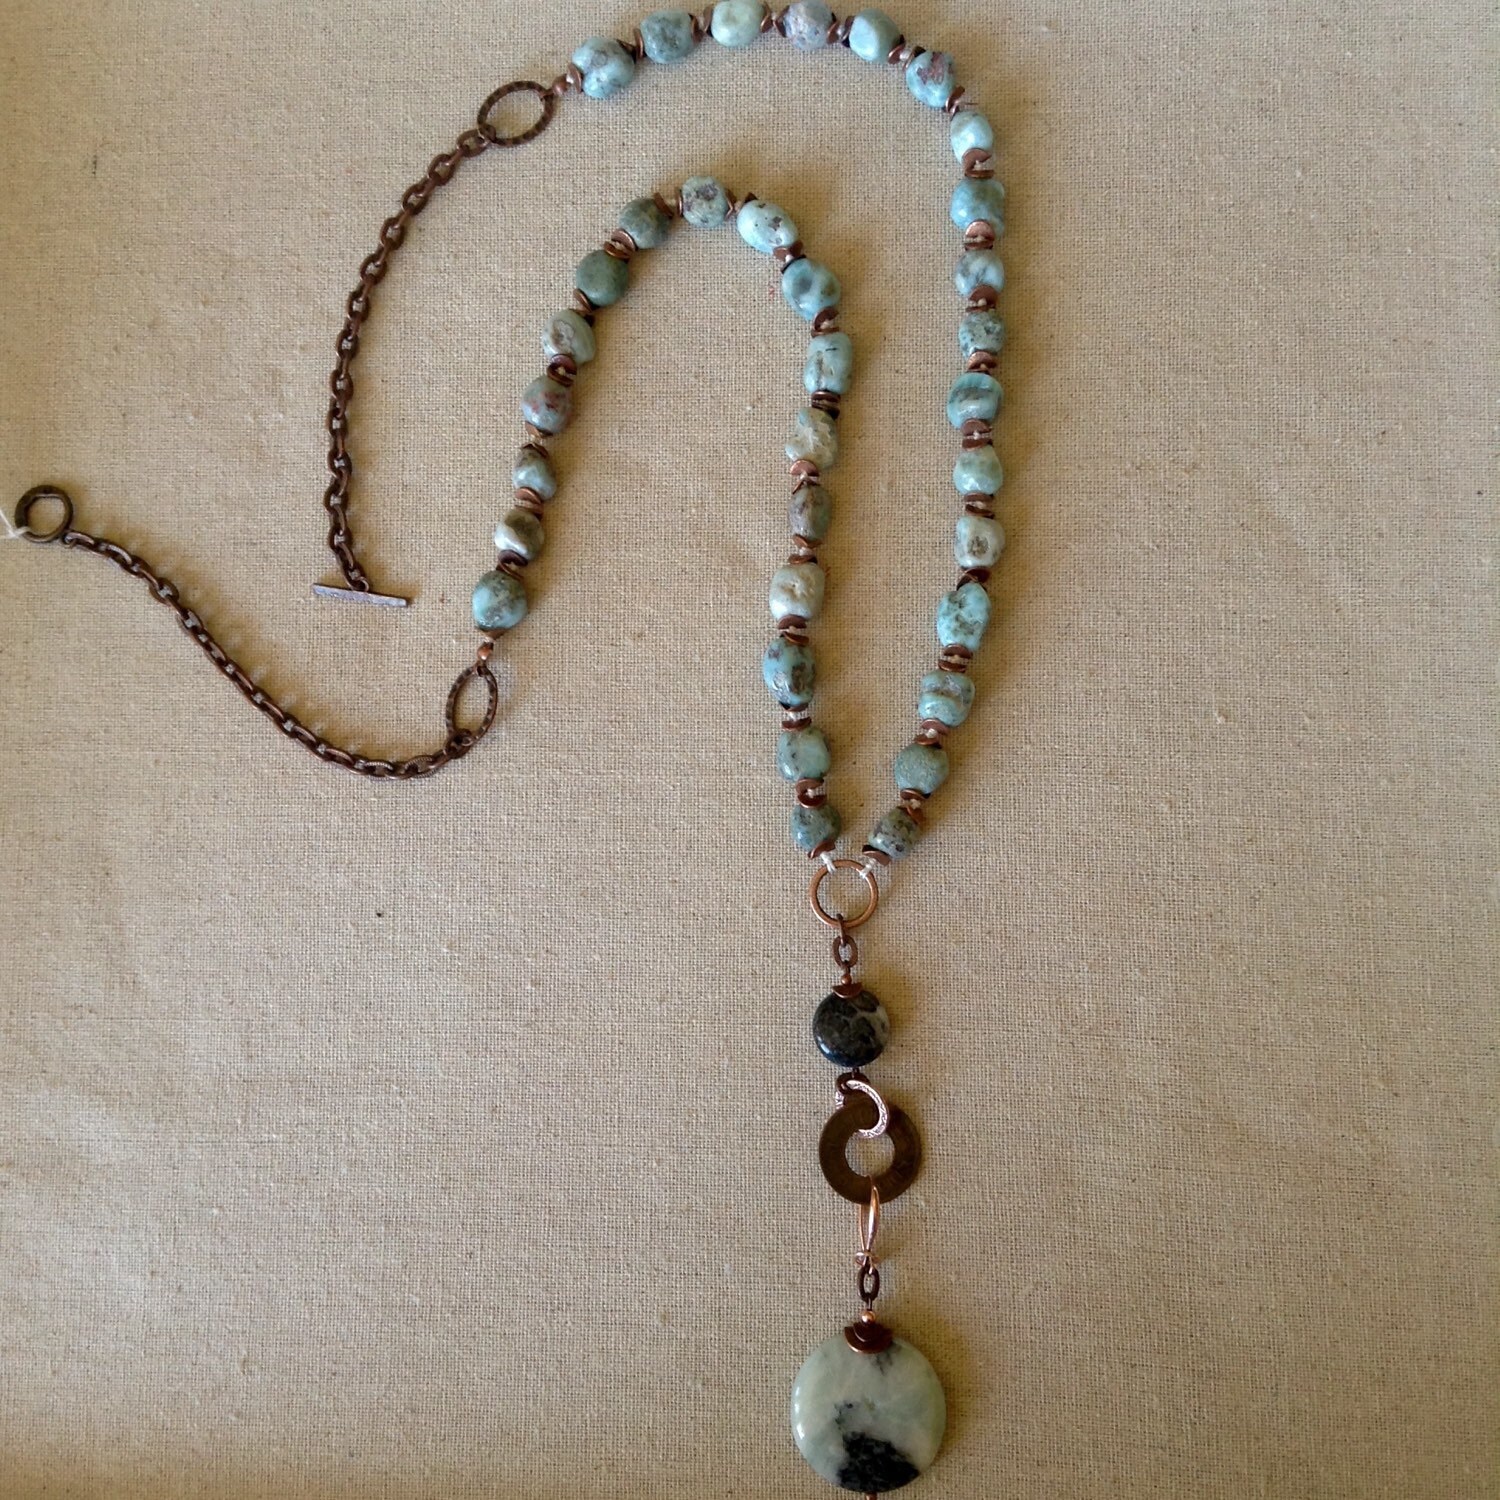 Larimar necklace by Nvcowgirlcreations on Etsy